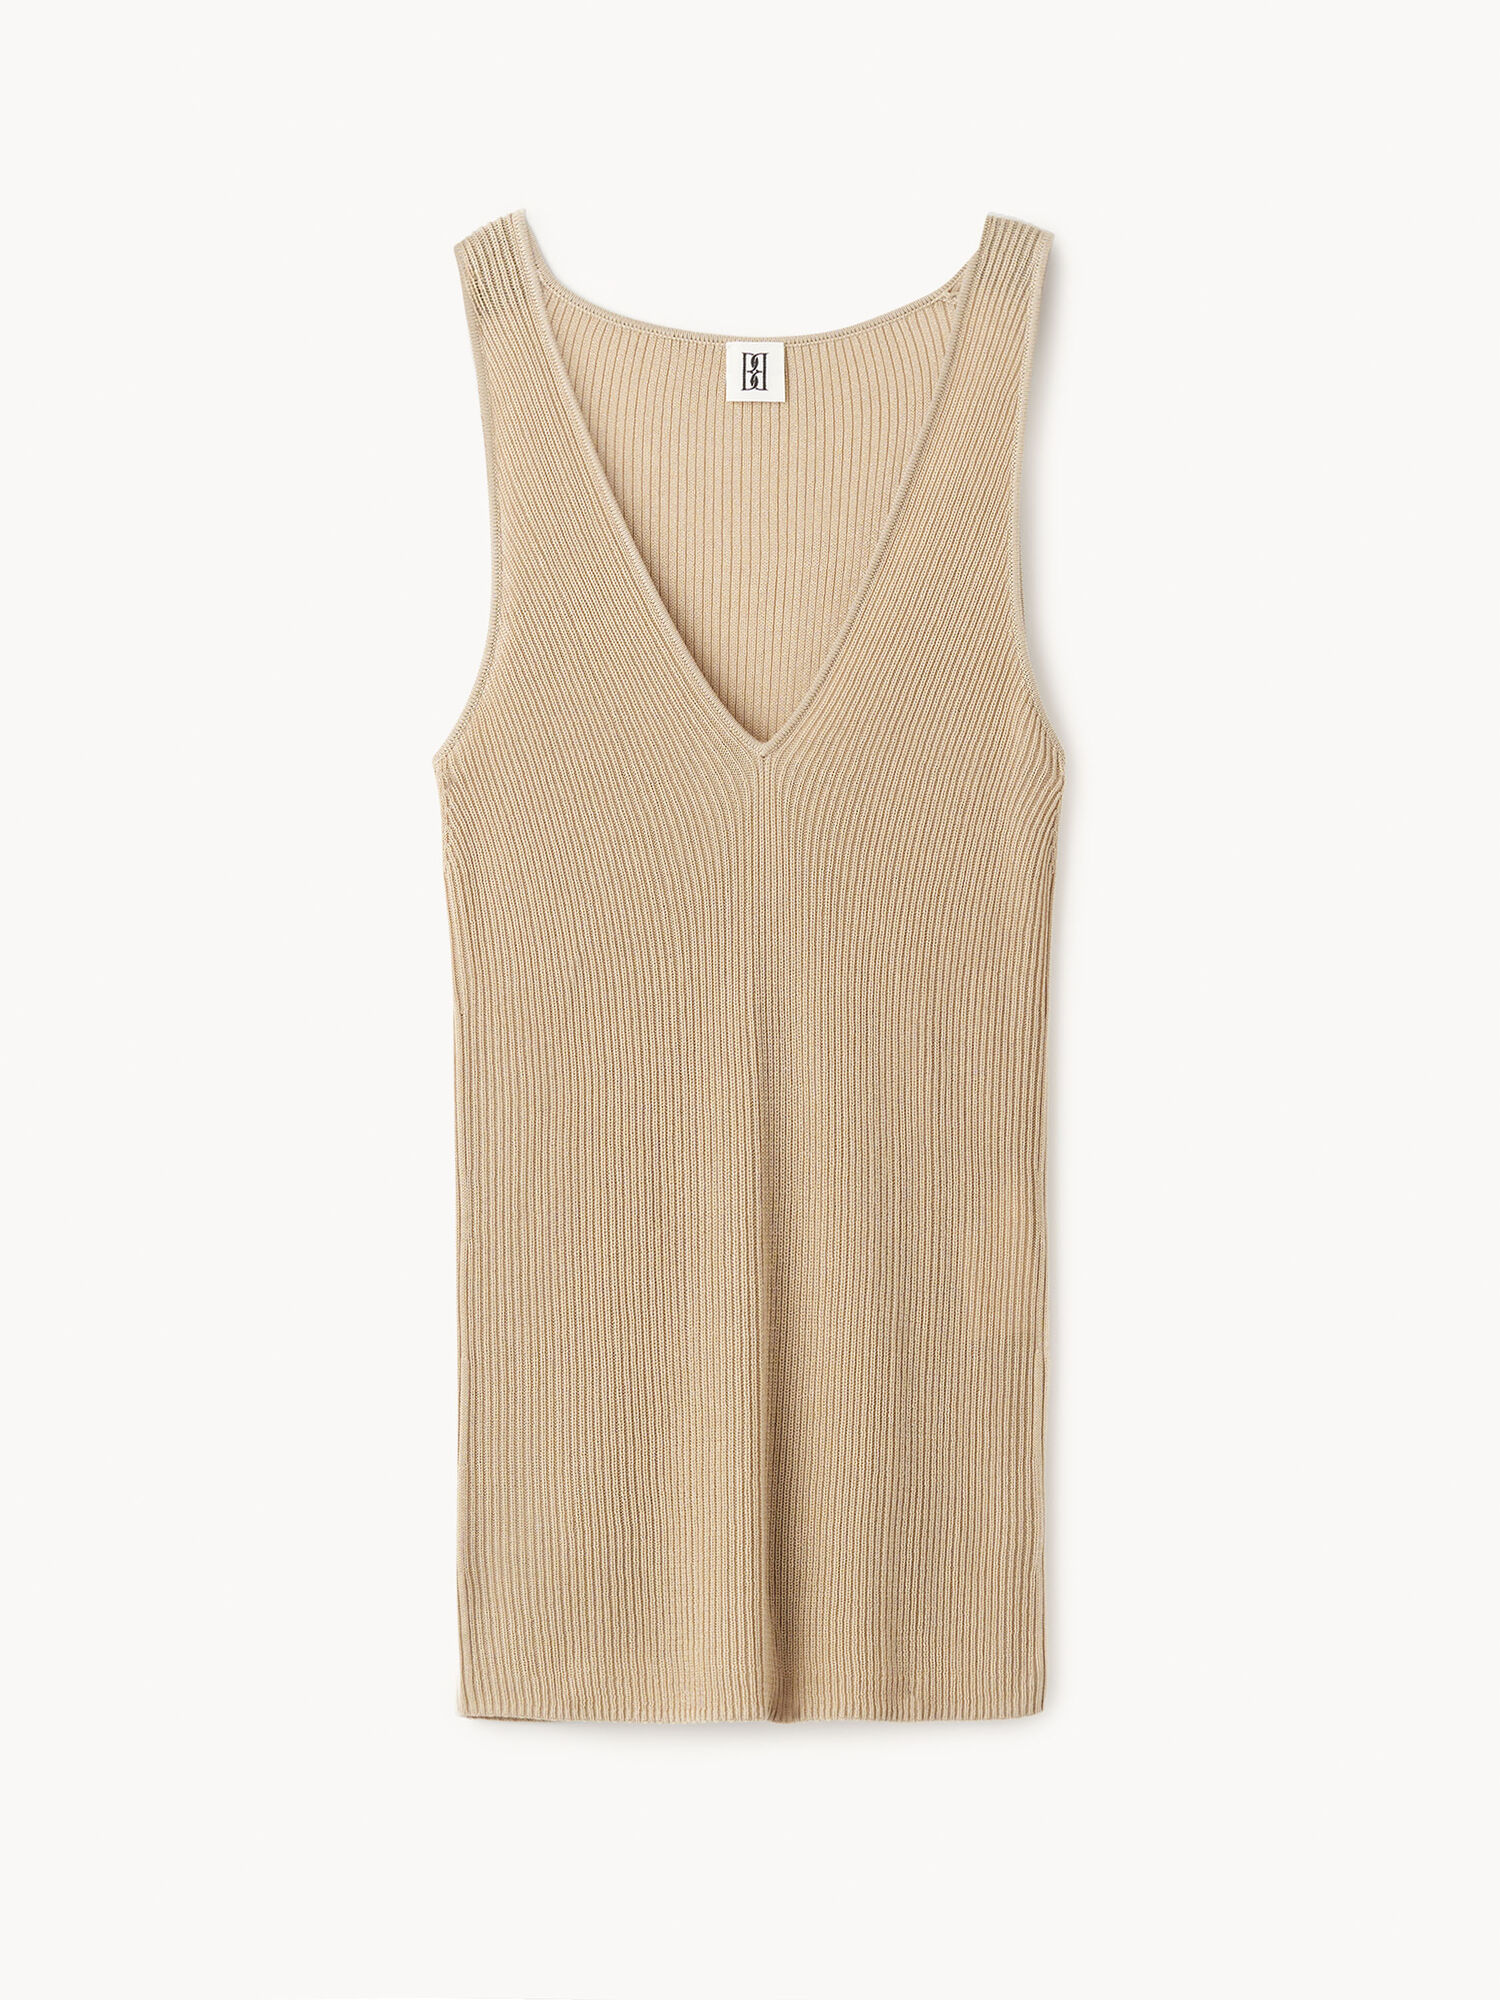 Rory tank top